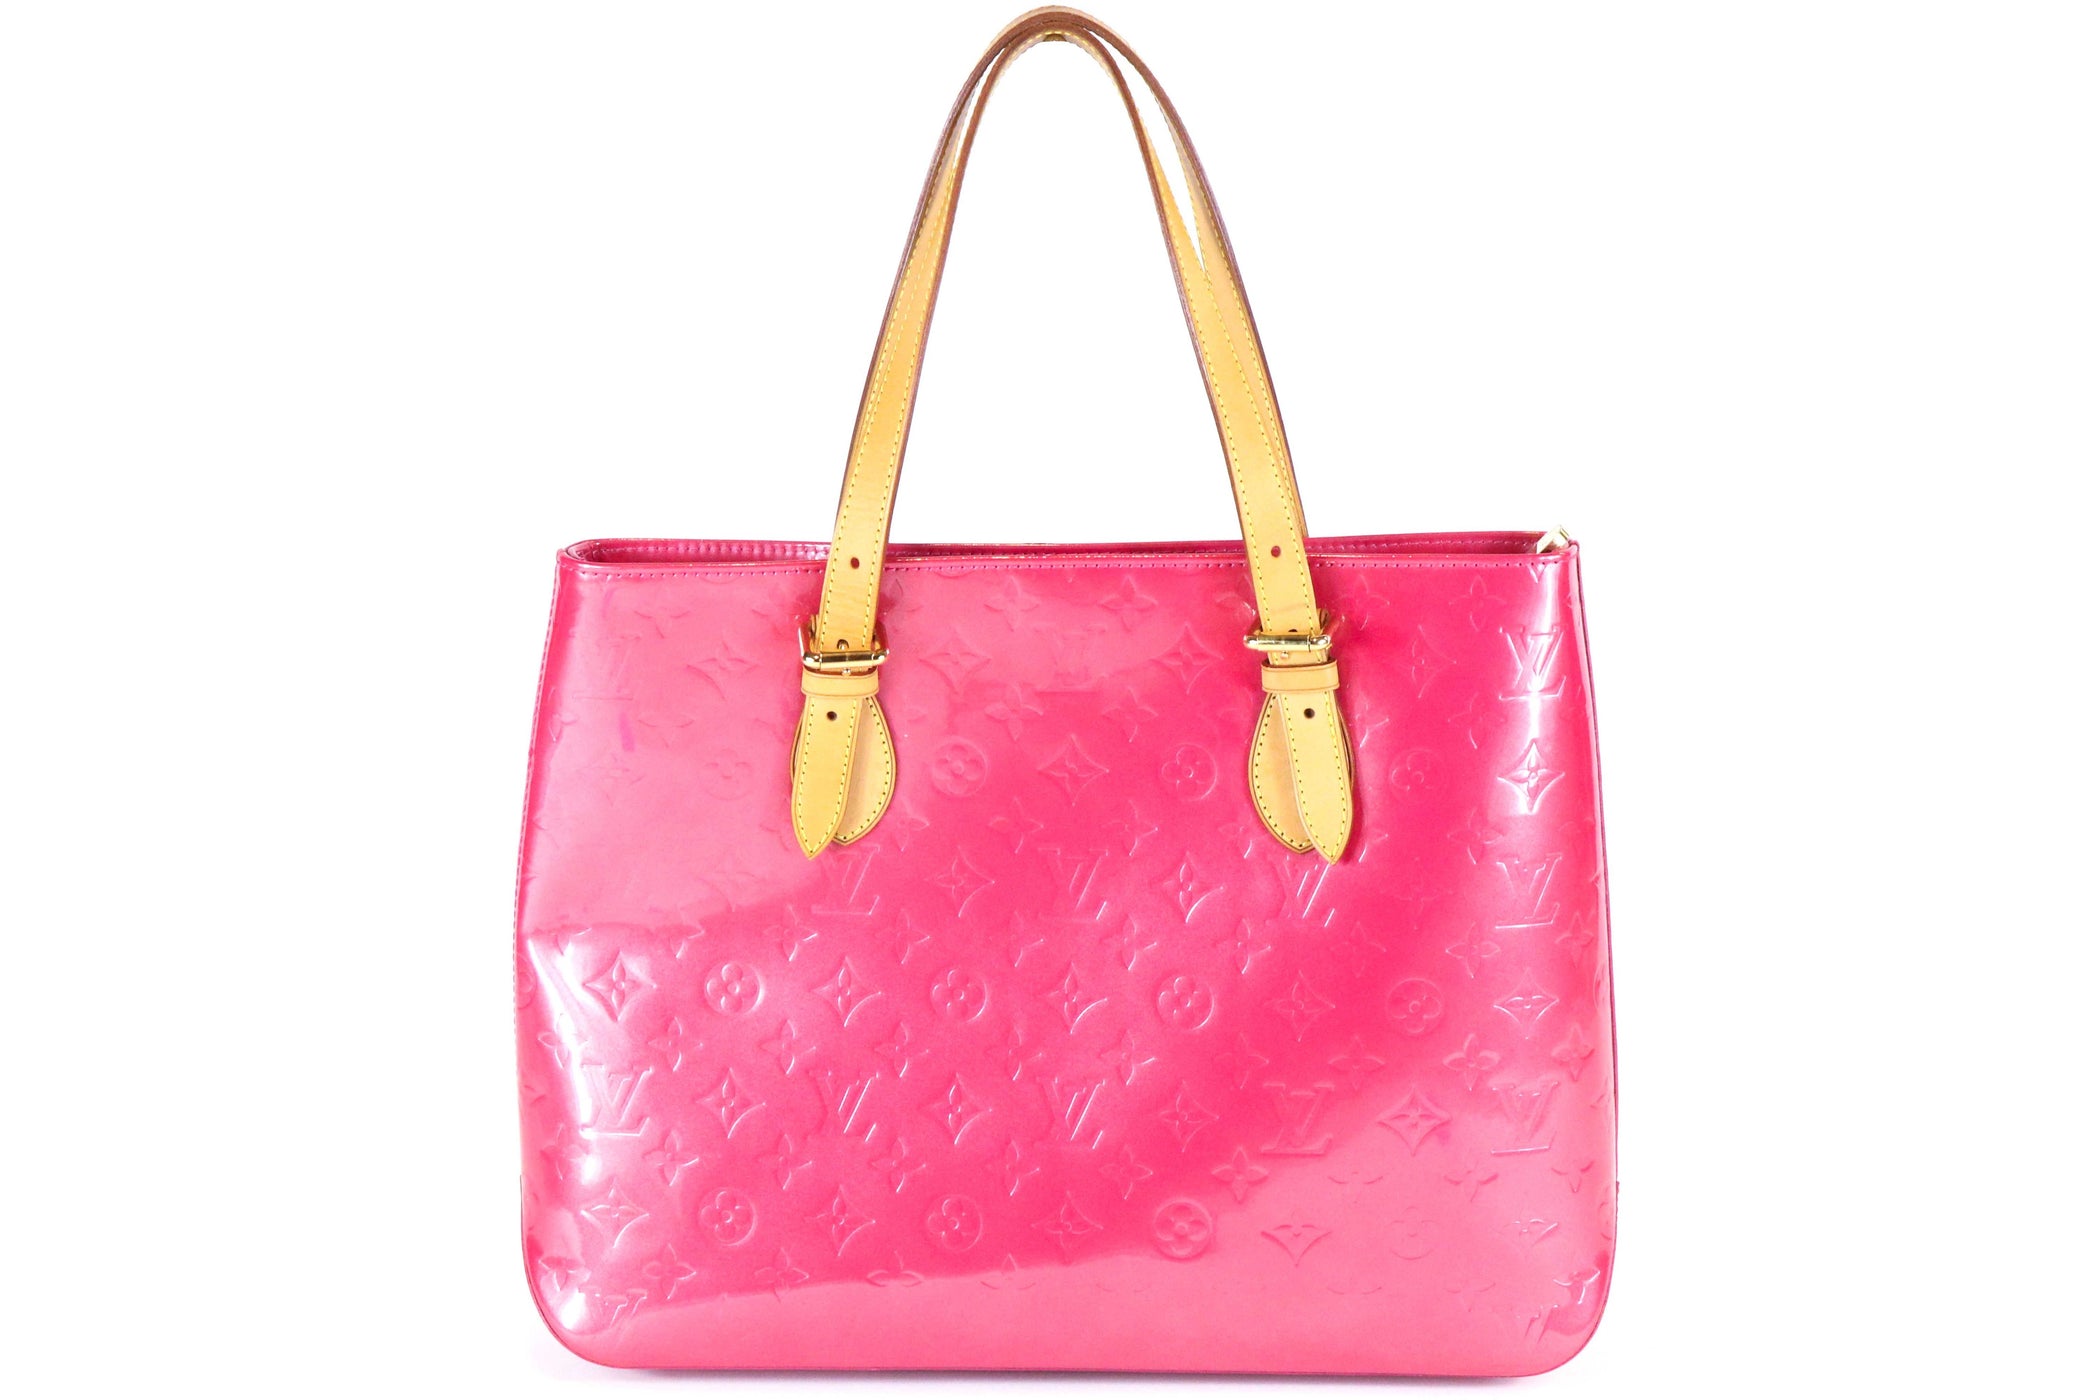 LOUIS VUITTON Vernis Pink Brentwood Tote — QUEEN MAY